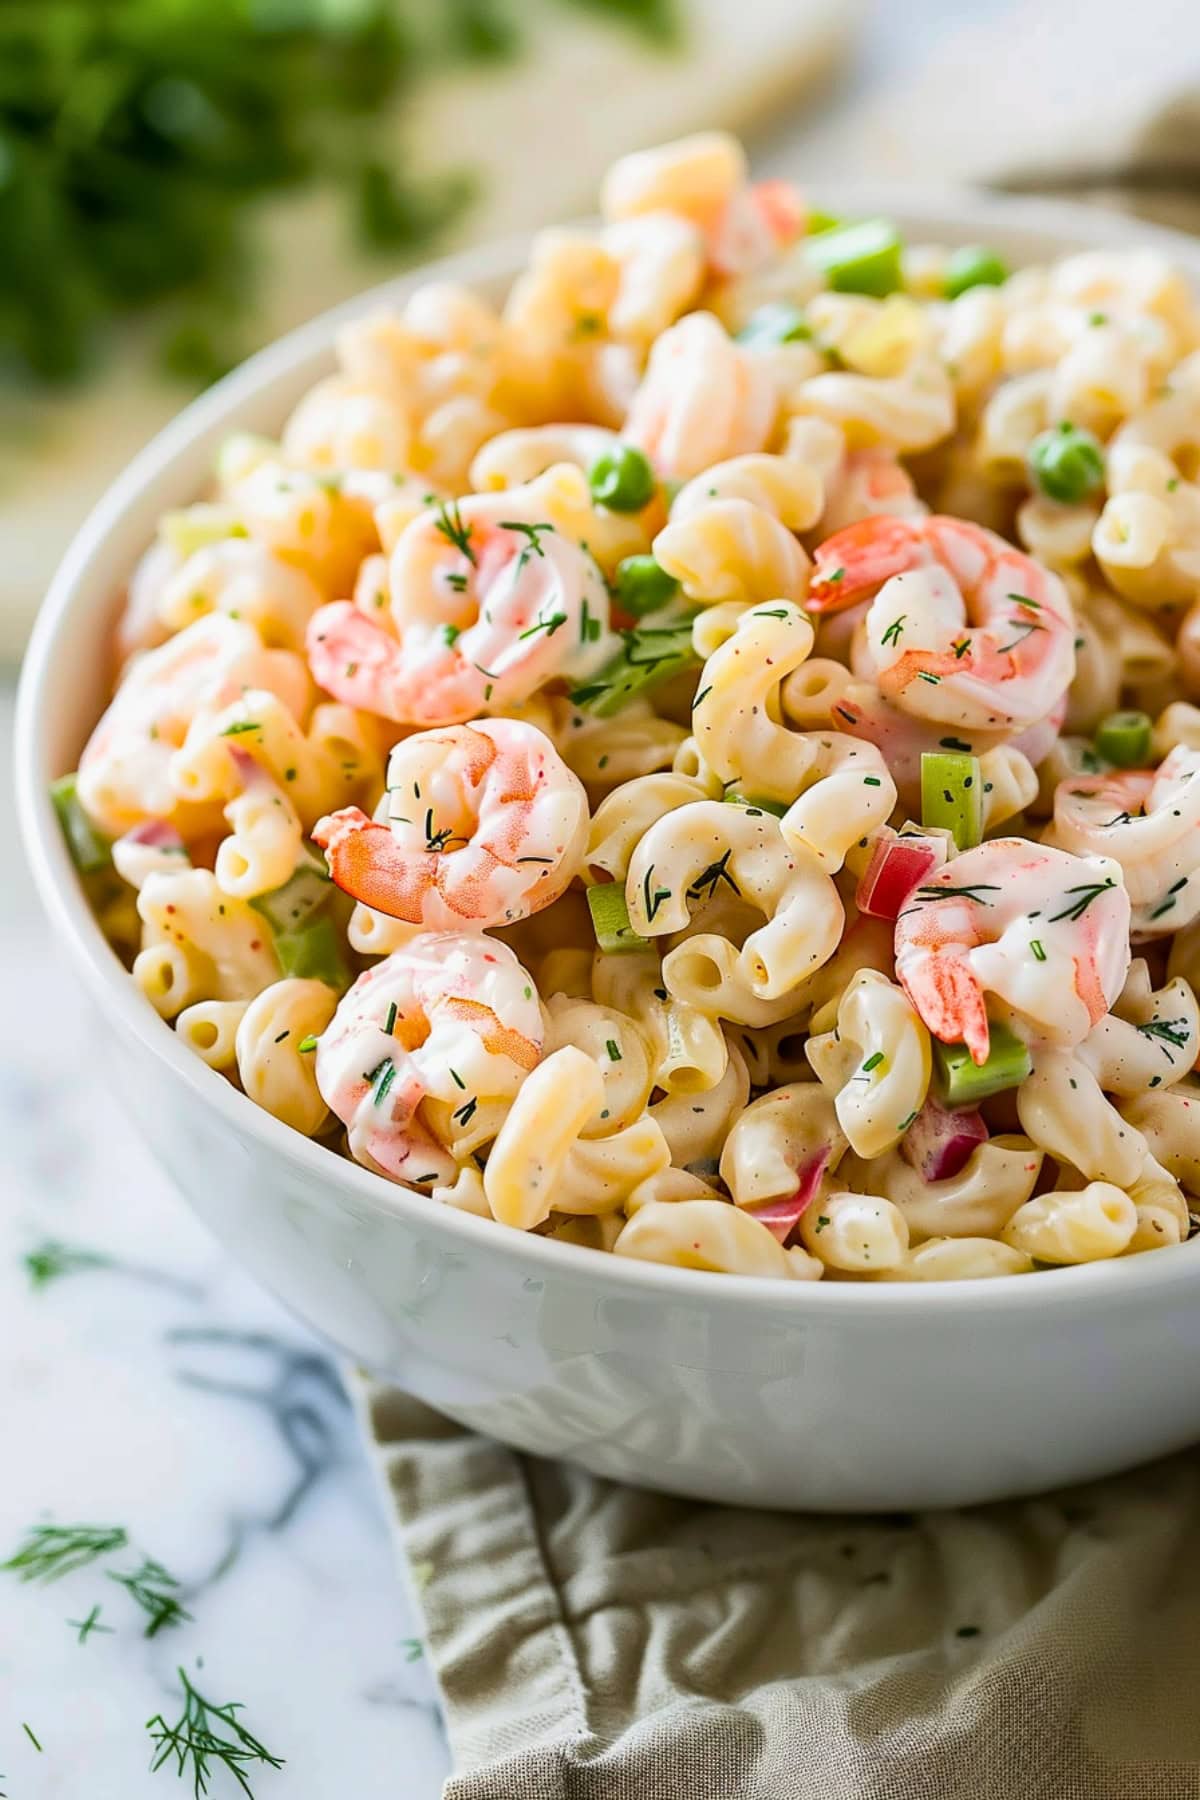 Shrimp pasta salad with juicy shrimp, crisp veggies, and a tangy dressing served on a white bowl.